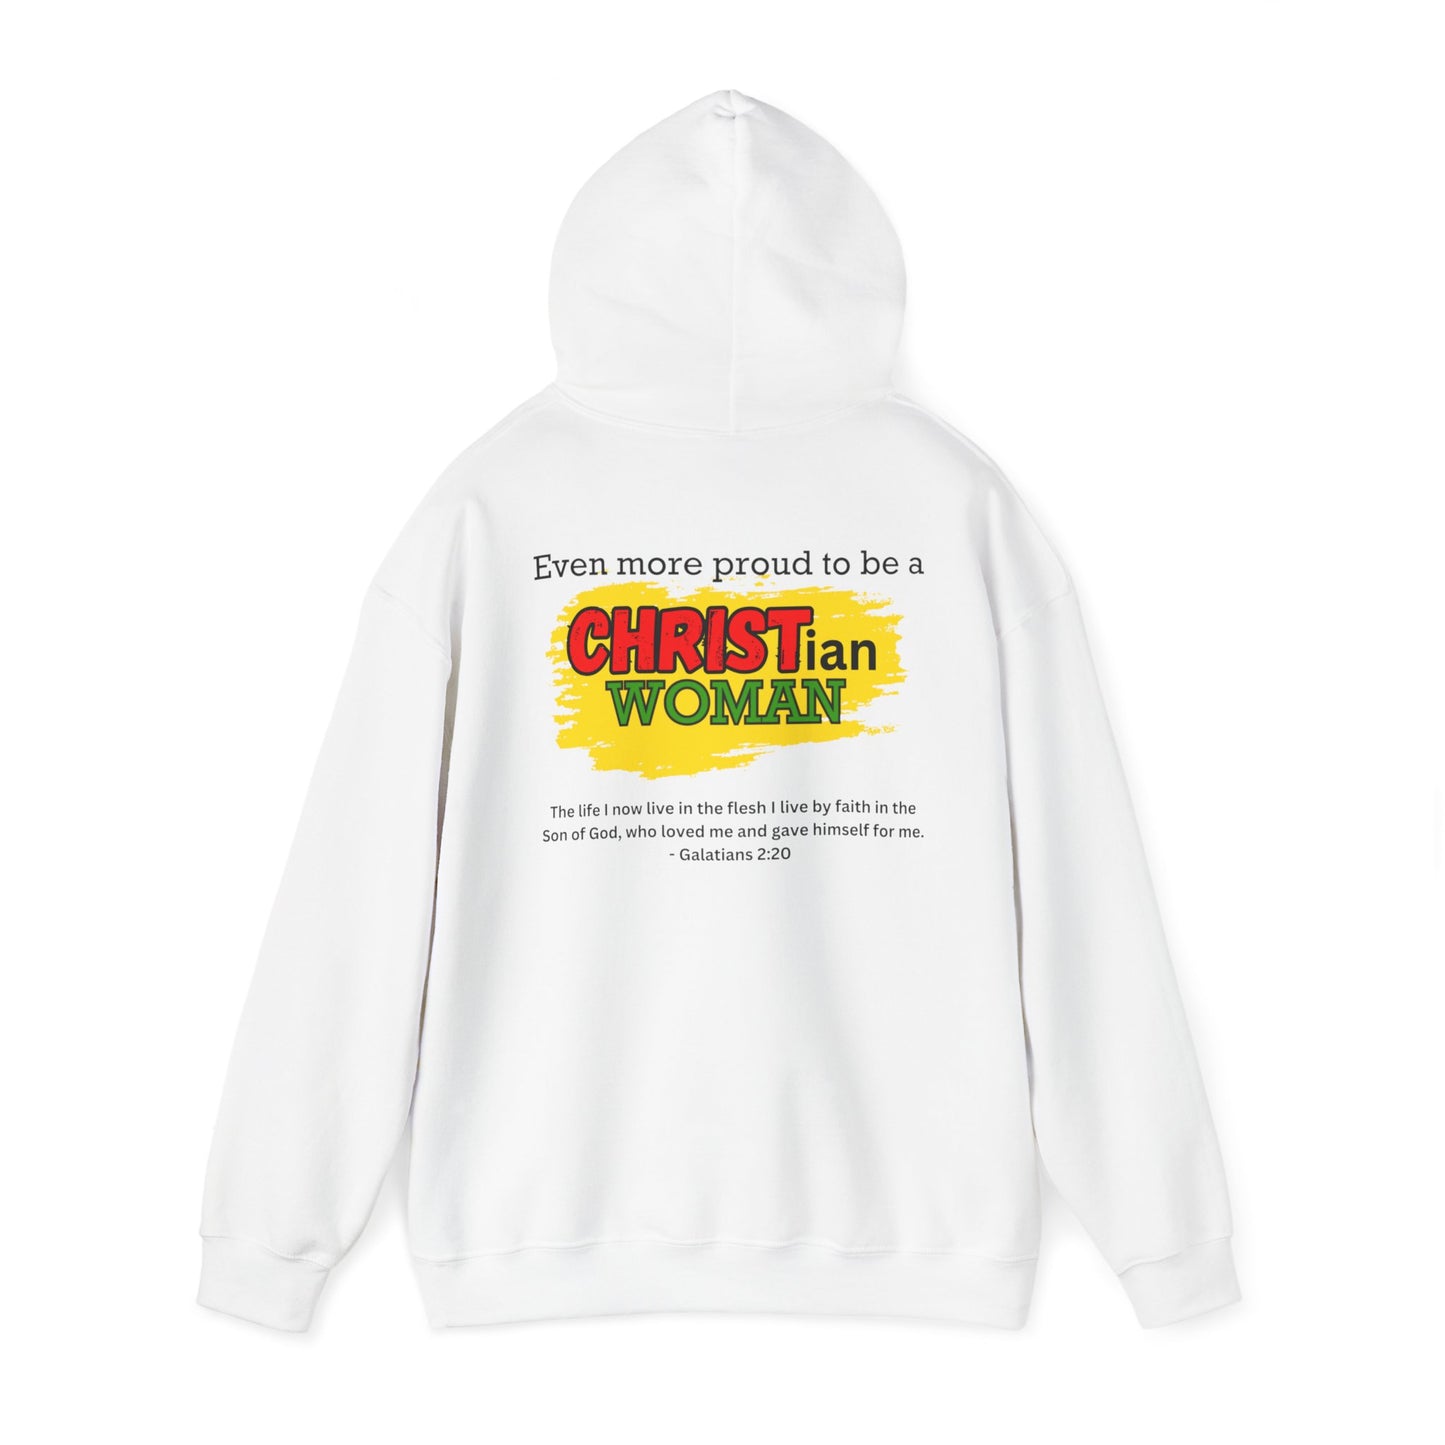 Black Christian Woman Hoodie in White - Embrace Black History with Triumph Tees Faith Fashion. Featuring empowering designs for women. Shop now for stylish faith wear!